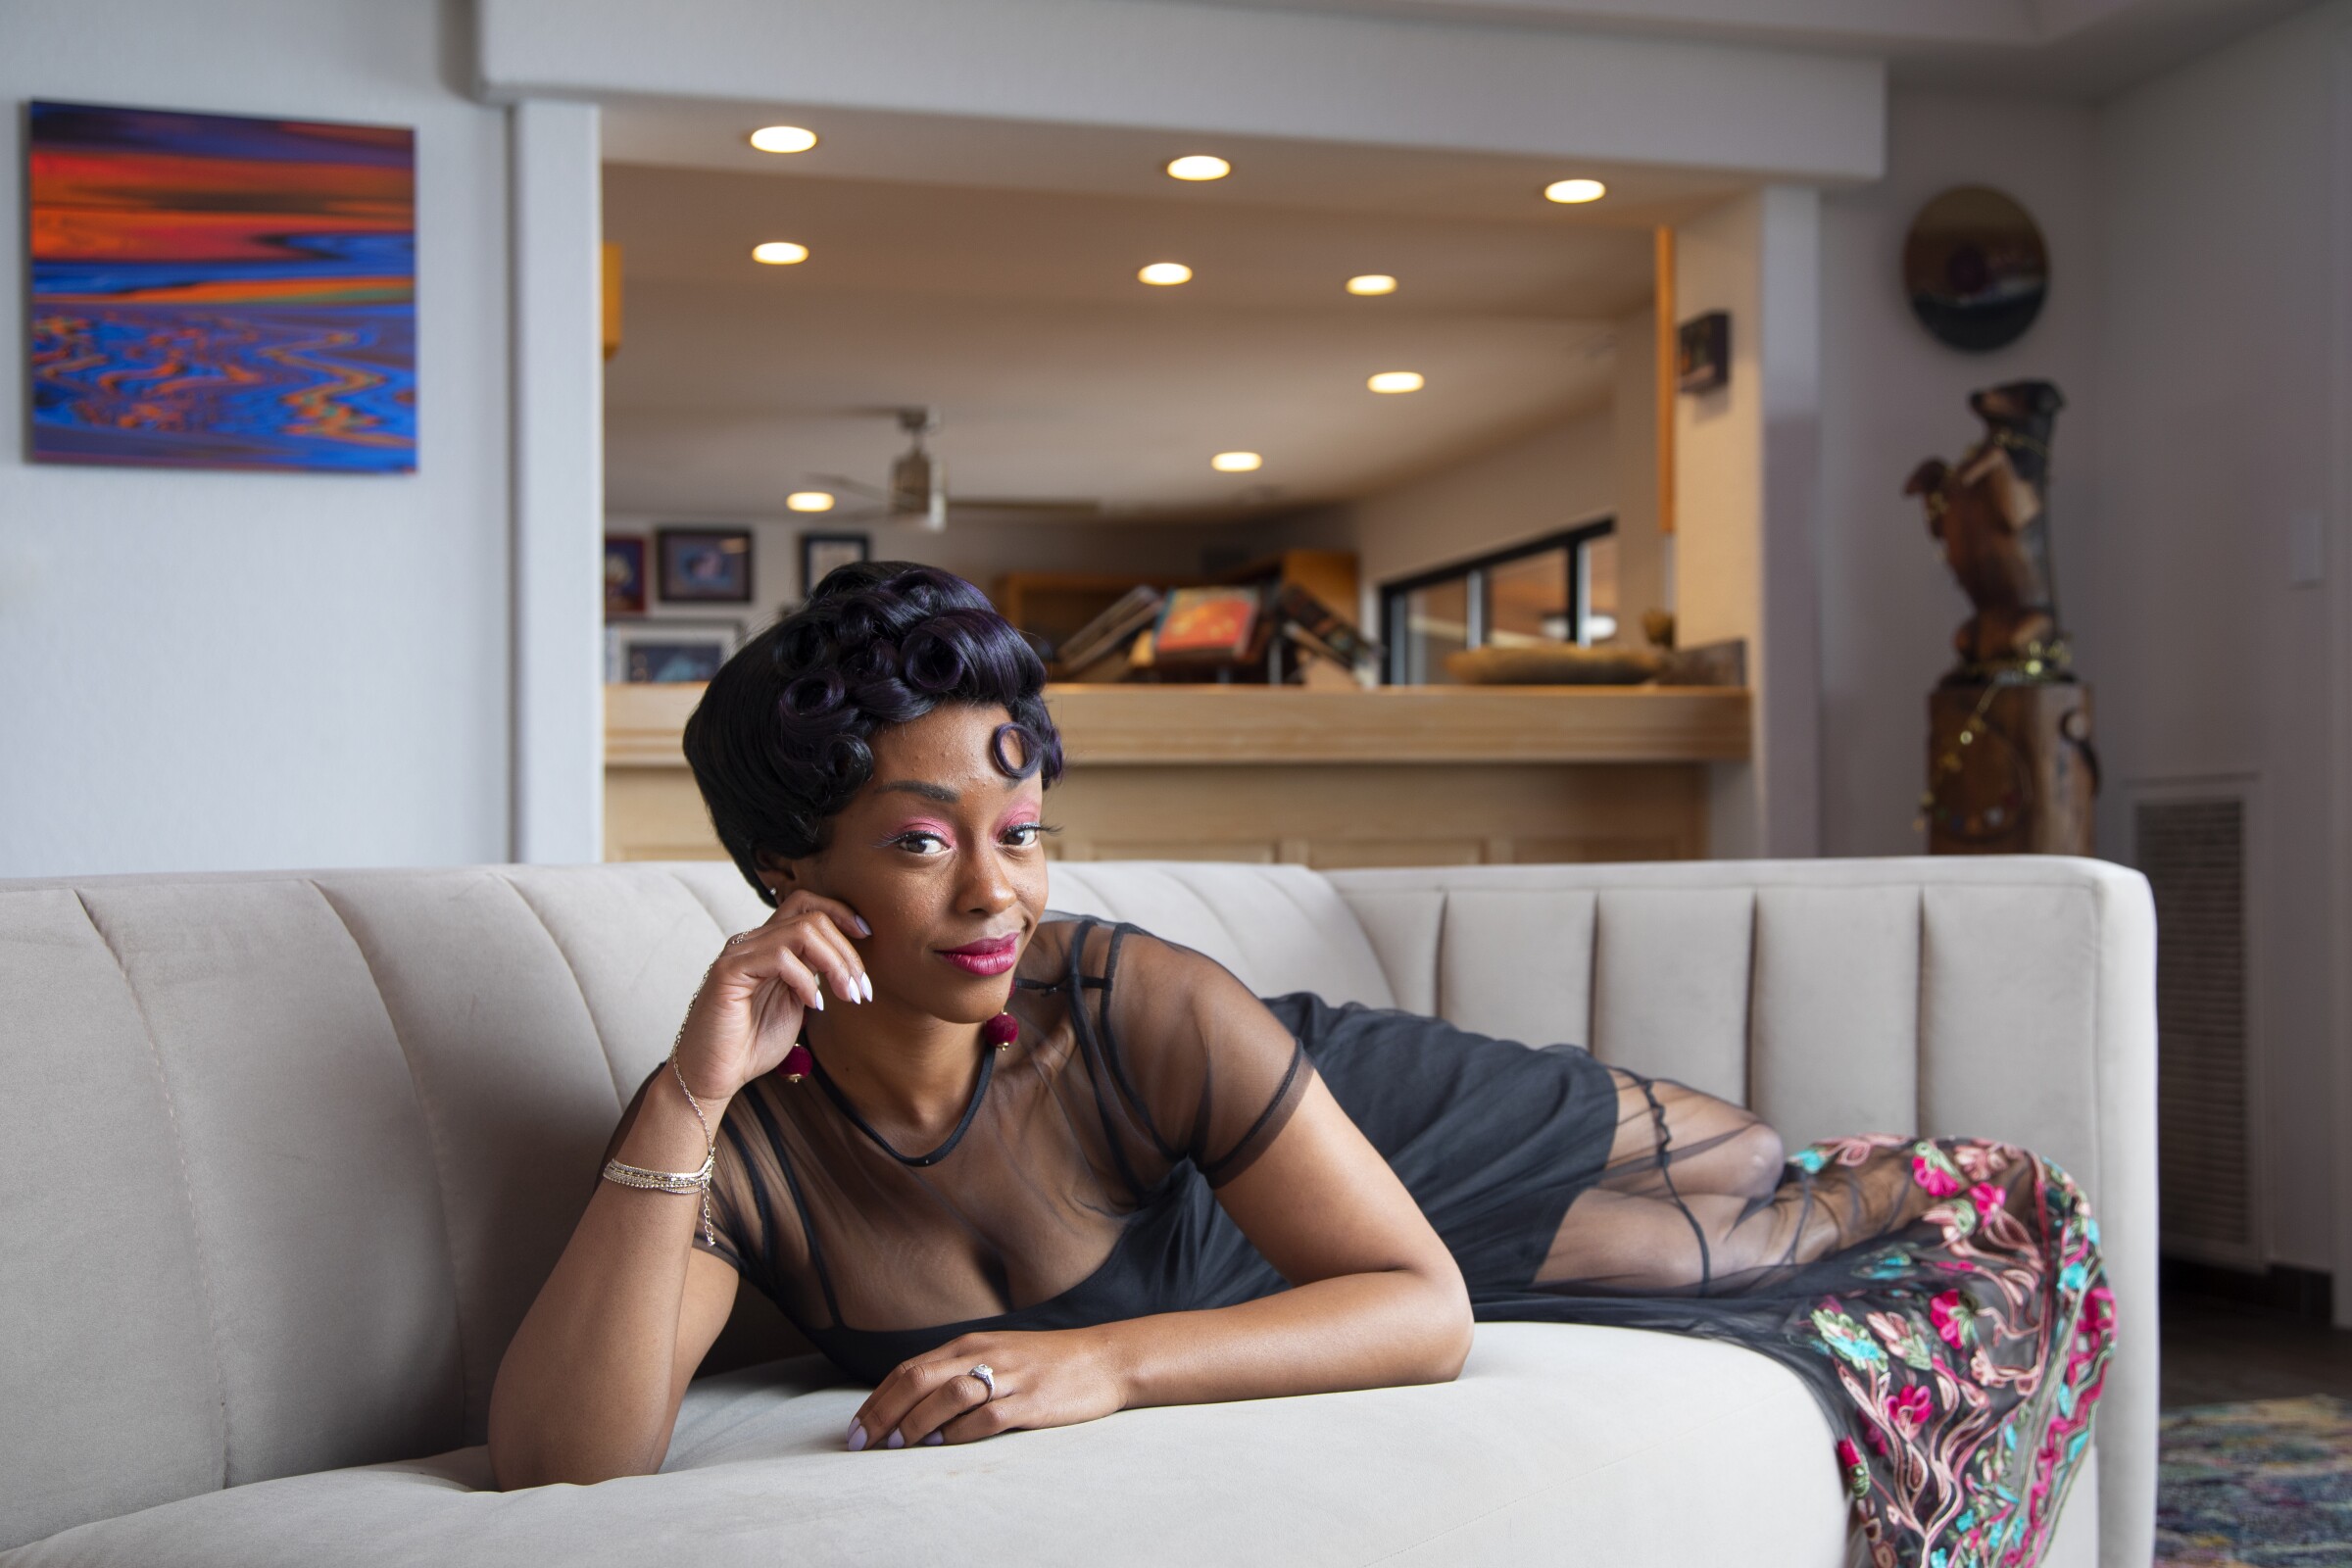 Cashae Monya, a longtime local theater actress who recently won artist of the year. Photographed at the home of Pam Wagner and Hans Tegebo, on Mount Helix, March 12, 2020 in La Mesa, California.